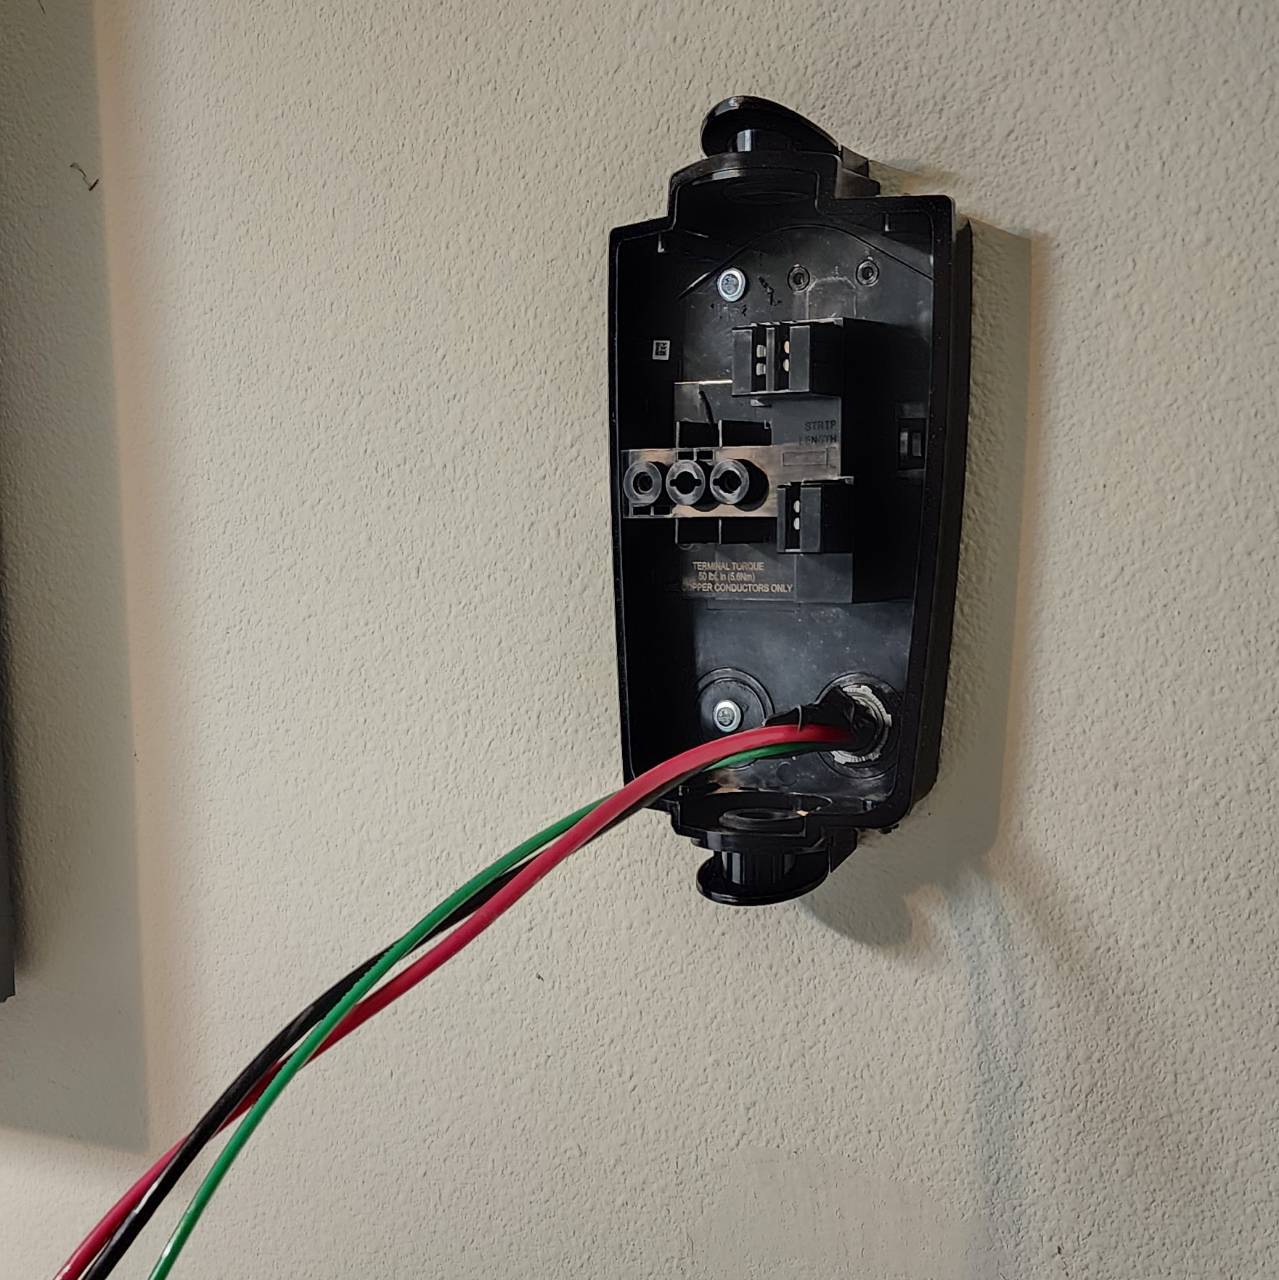 Gen 3 Tesla and Gen 3 J1772 Wall Connector Install Write up with